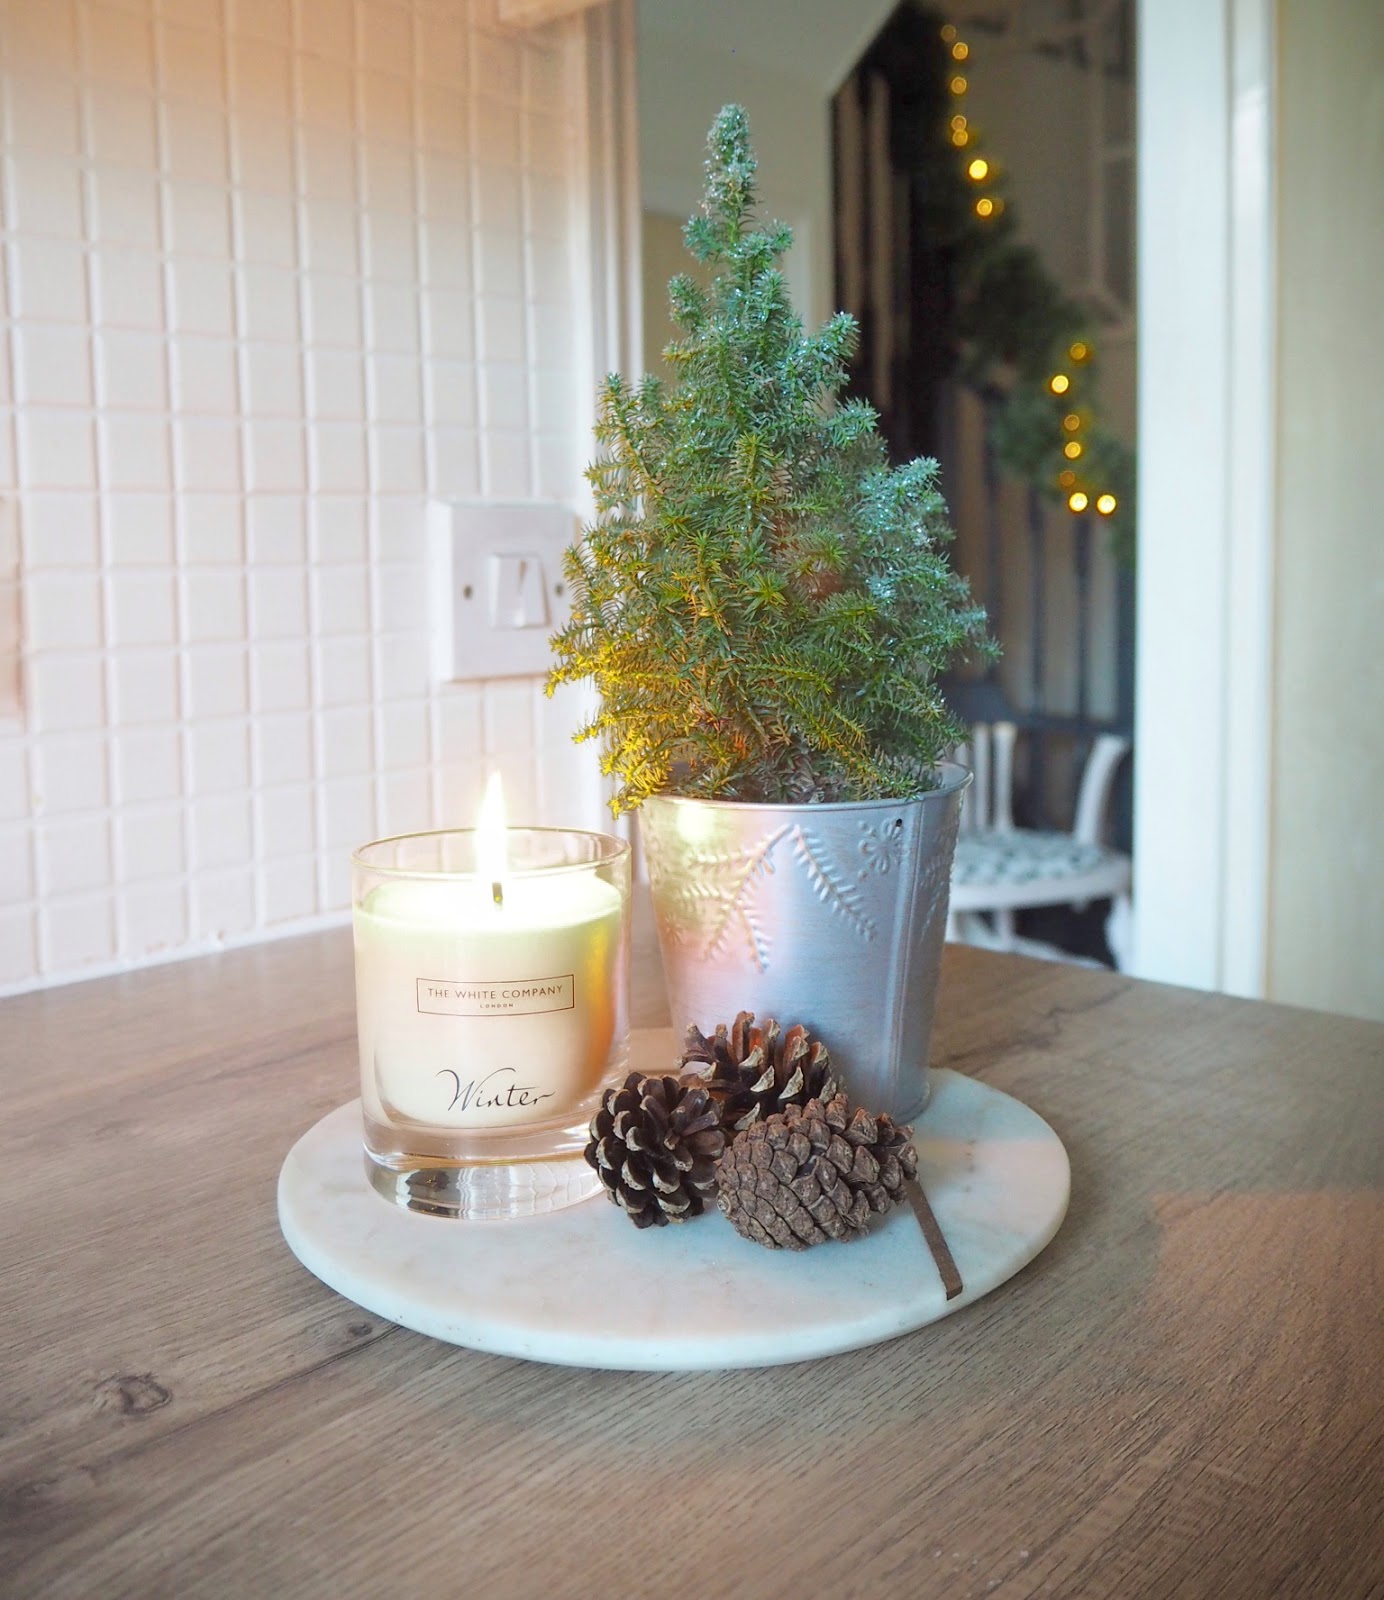 Christmas home interior inspiration in this small home christmas tour. How to style your home for christmas this year on a budget, with lots of decorations re-used from previous years.